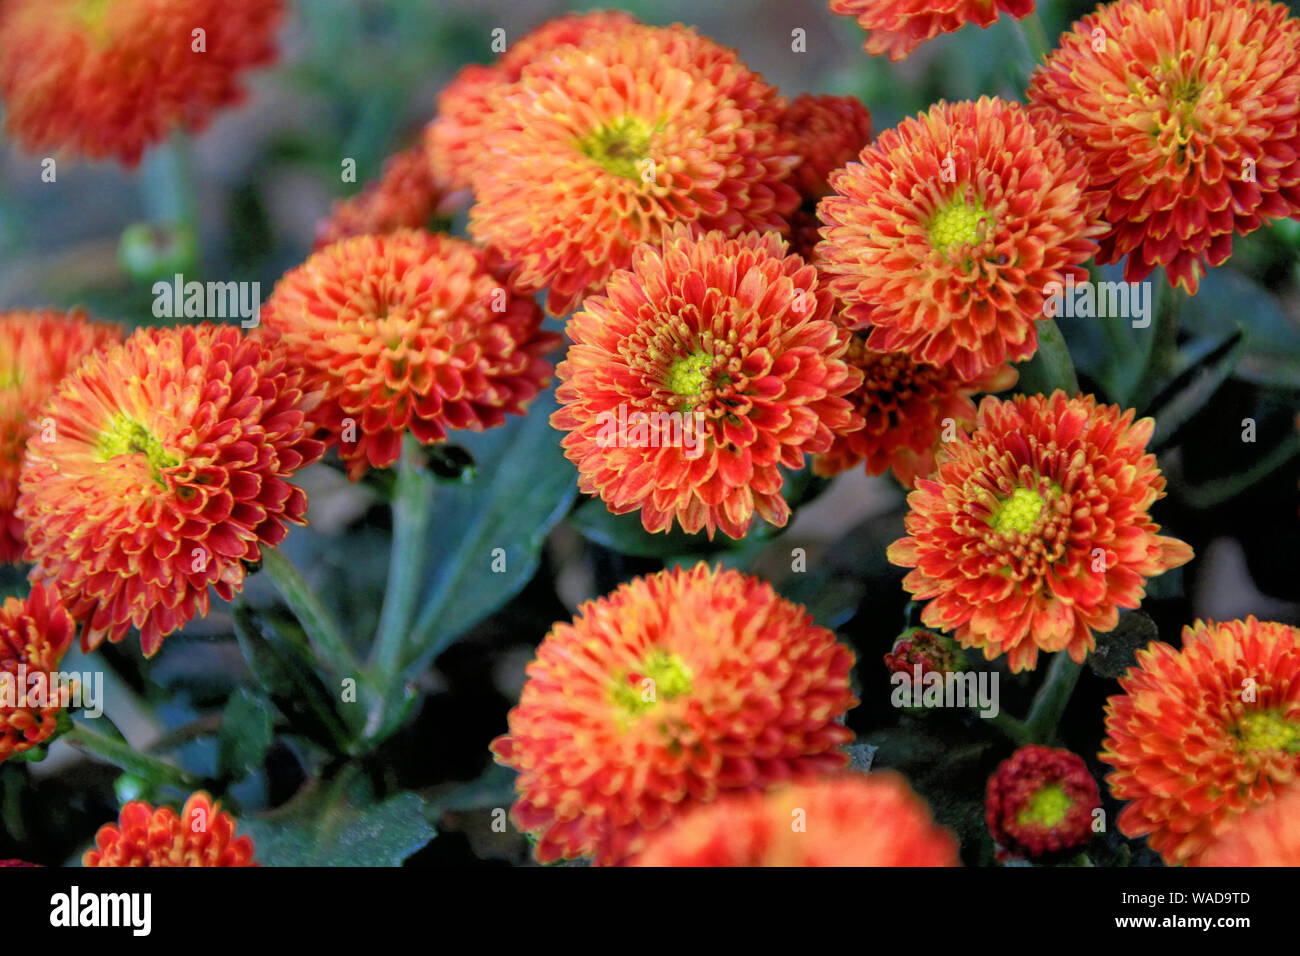 A close up of miniature orange and red Chrysanthemums against dark green foliage. Stock Photo